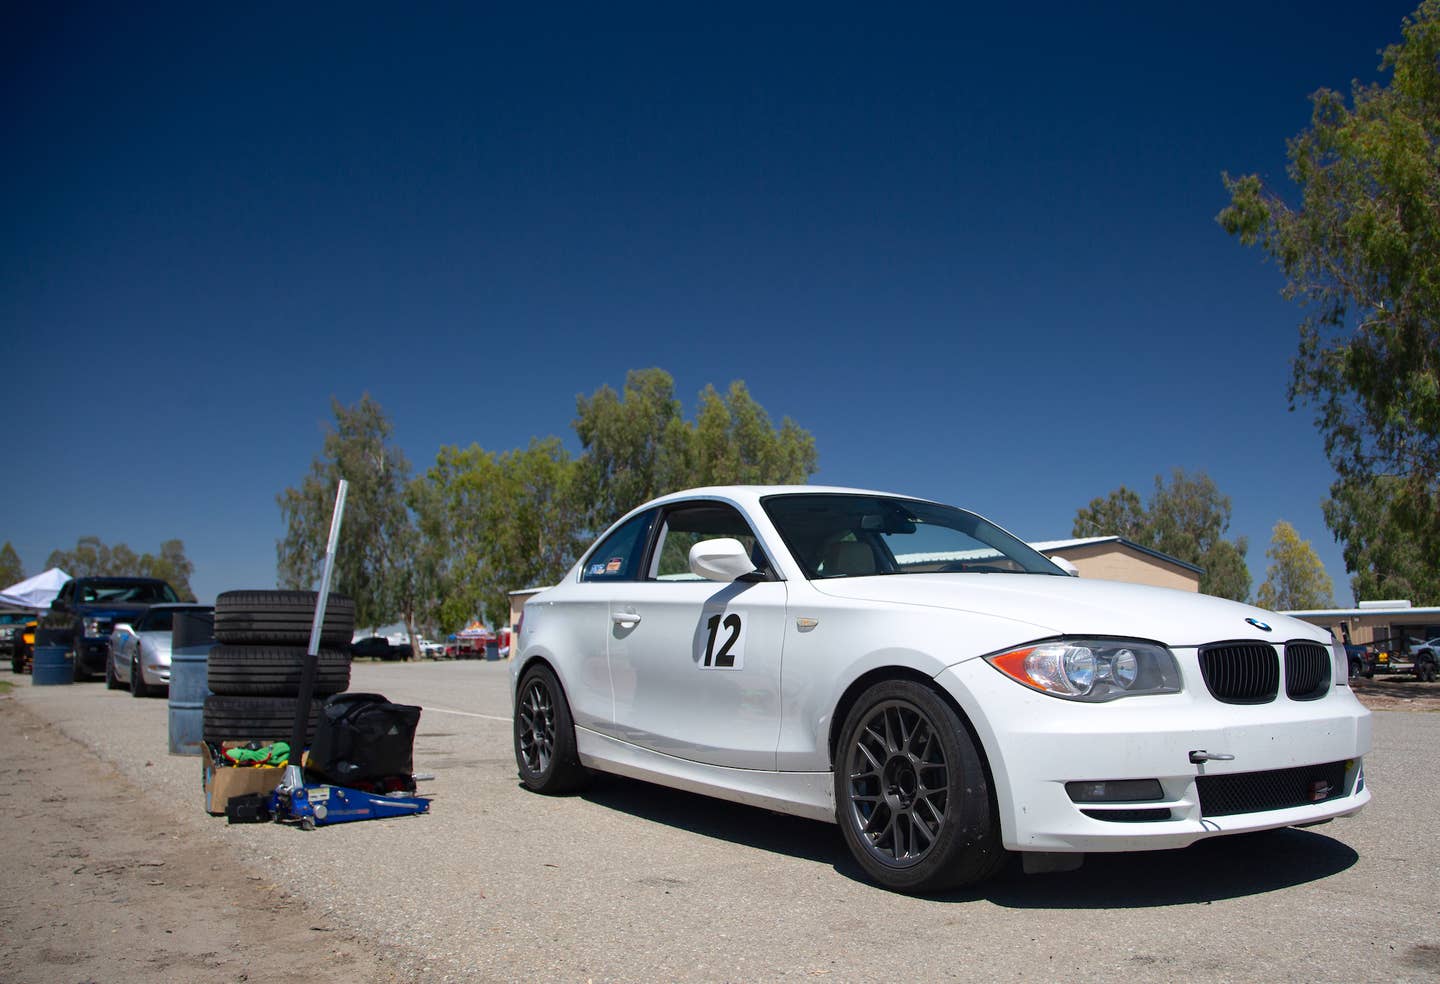 BMW 128i Hangin' in the Paddock